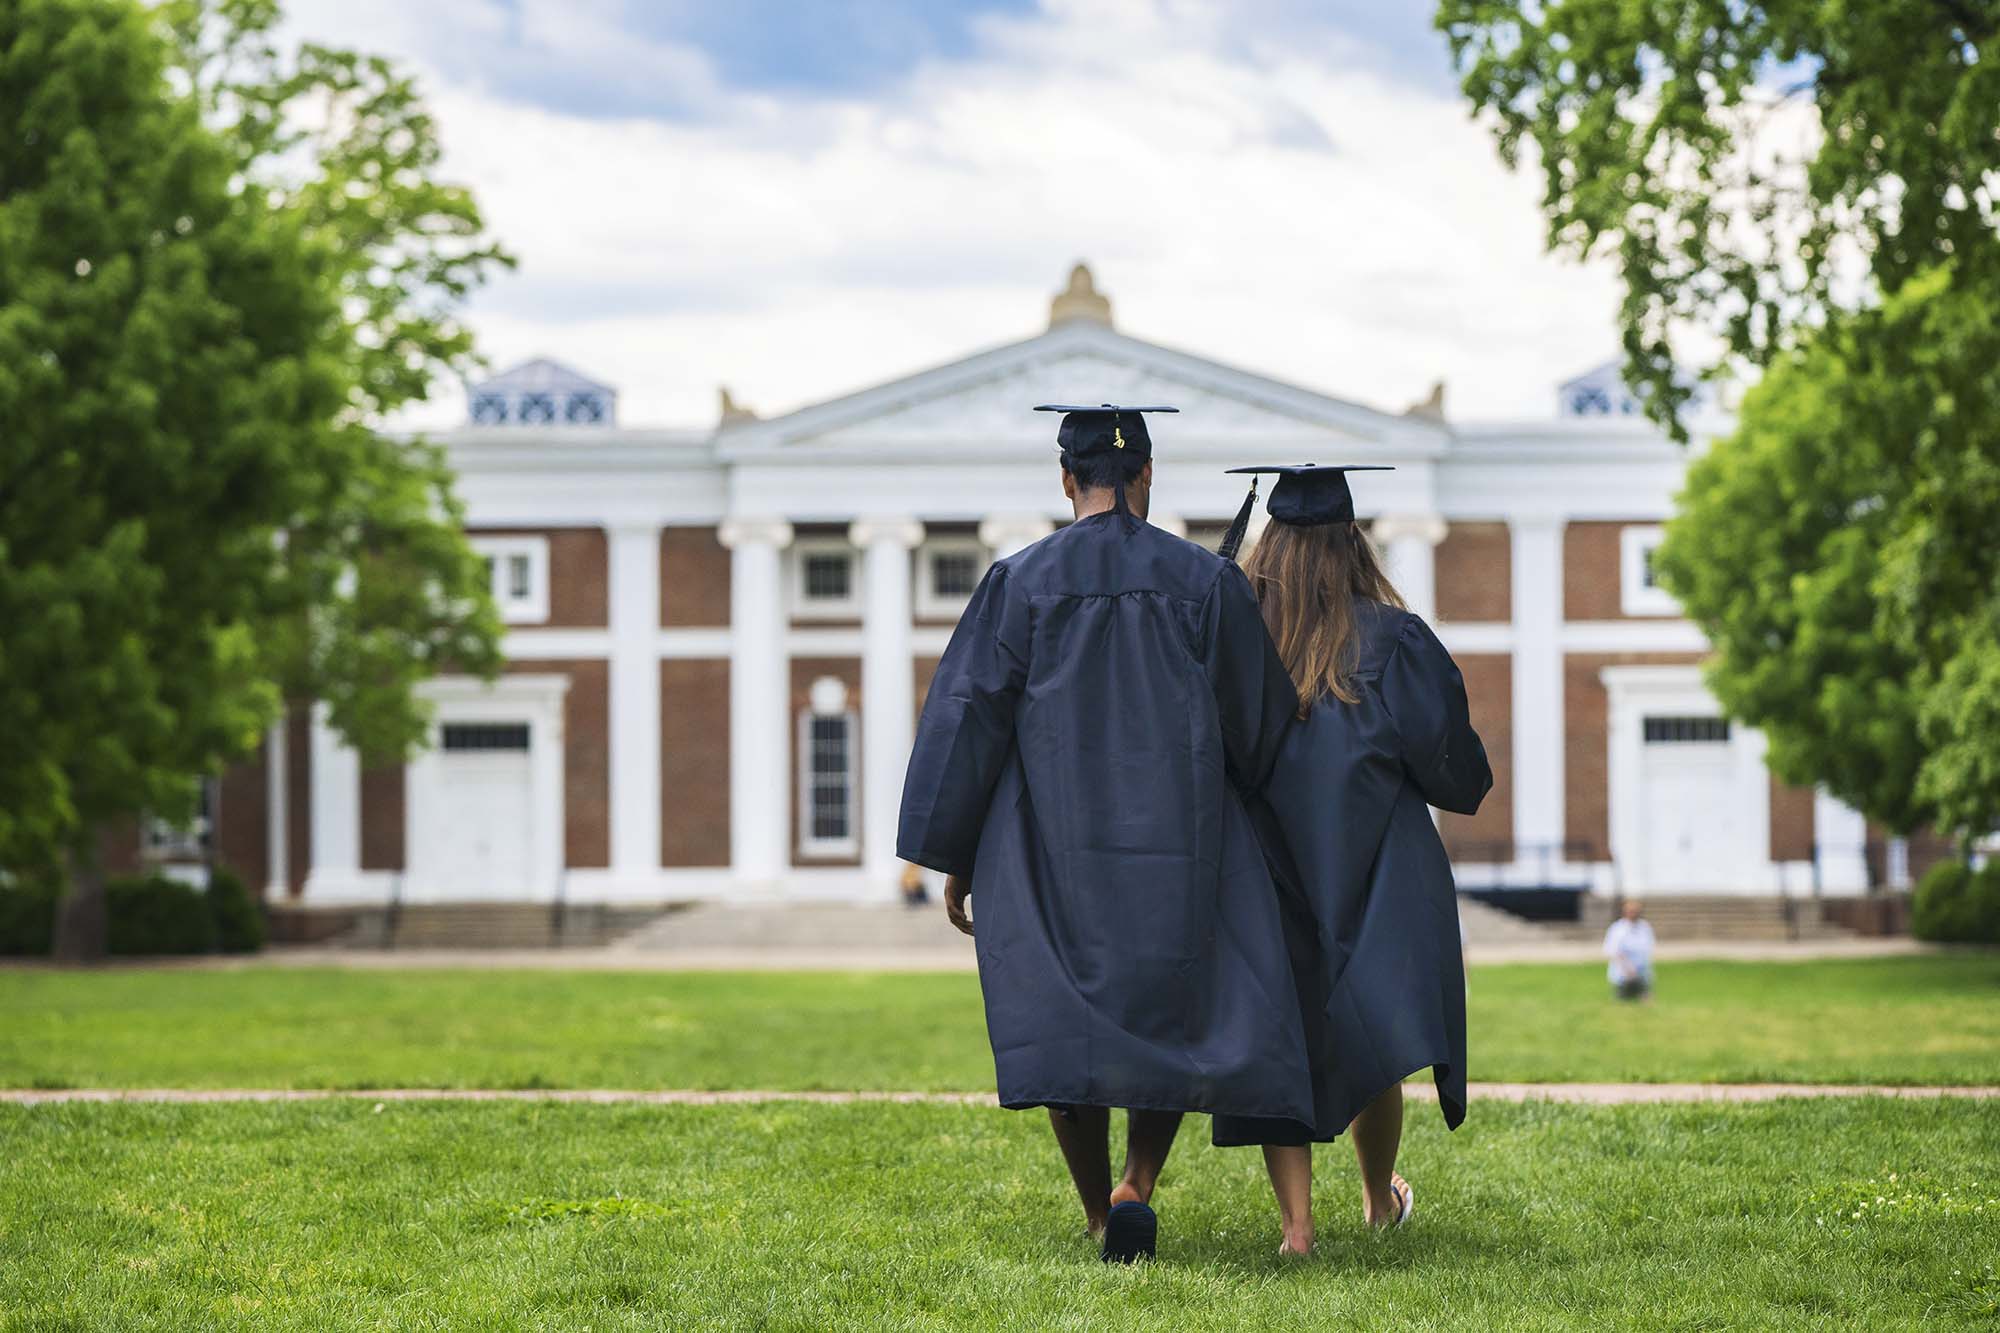 Two UVA Graduates walking across grounds in their caps and gowns